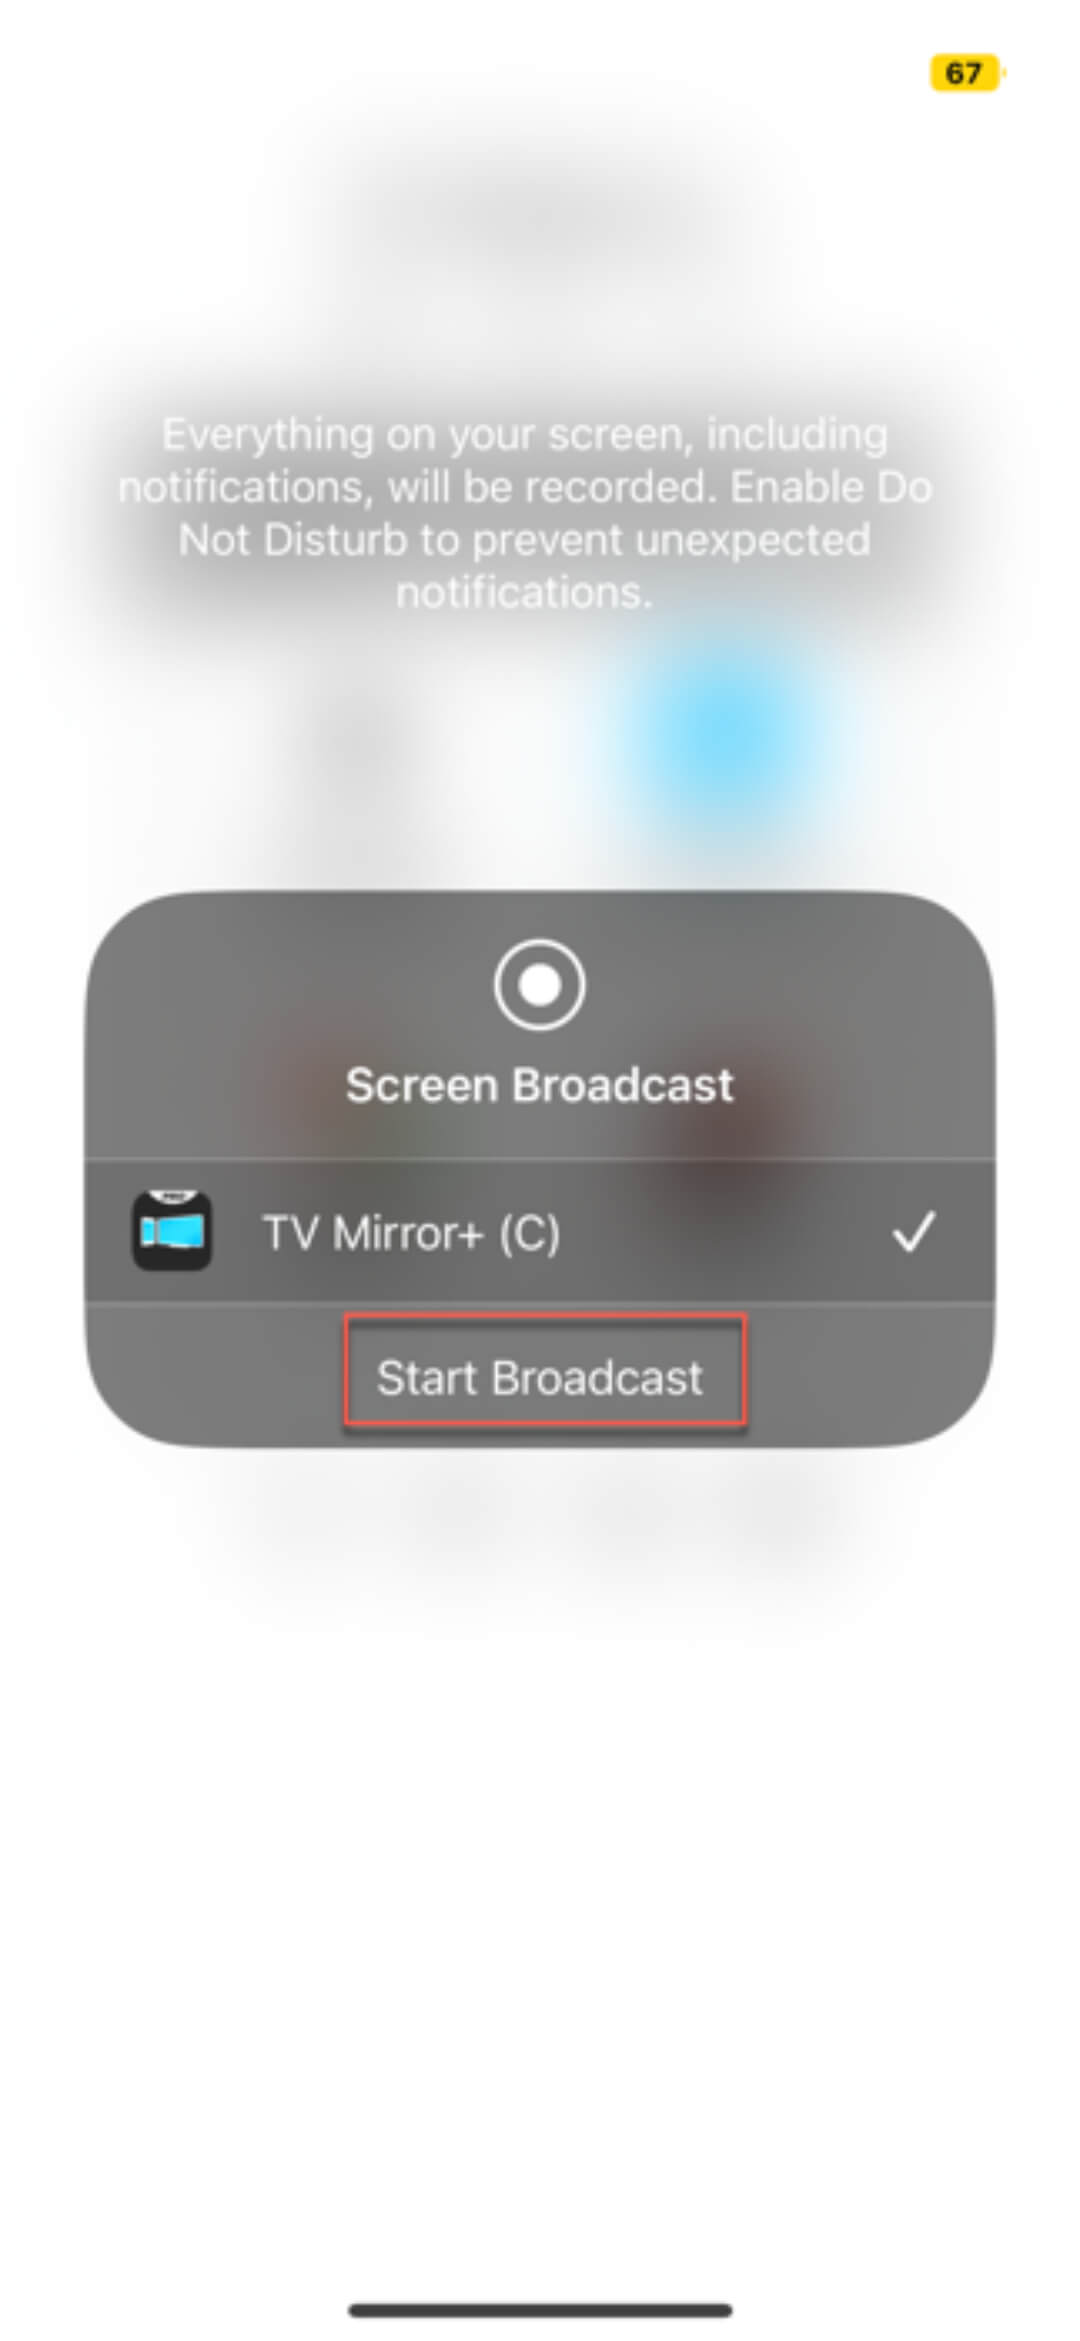 Select TV Mirror+ and tap Start Broadcast